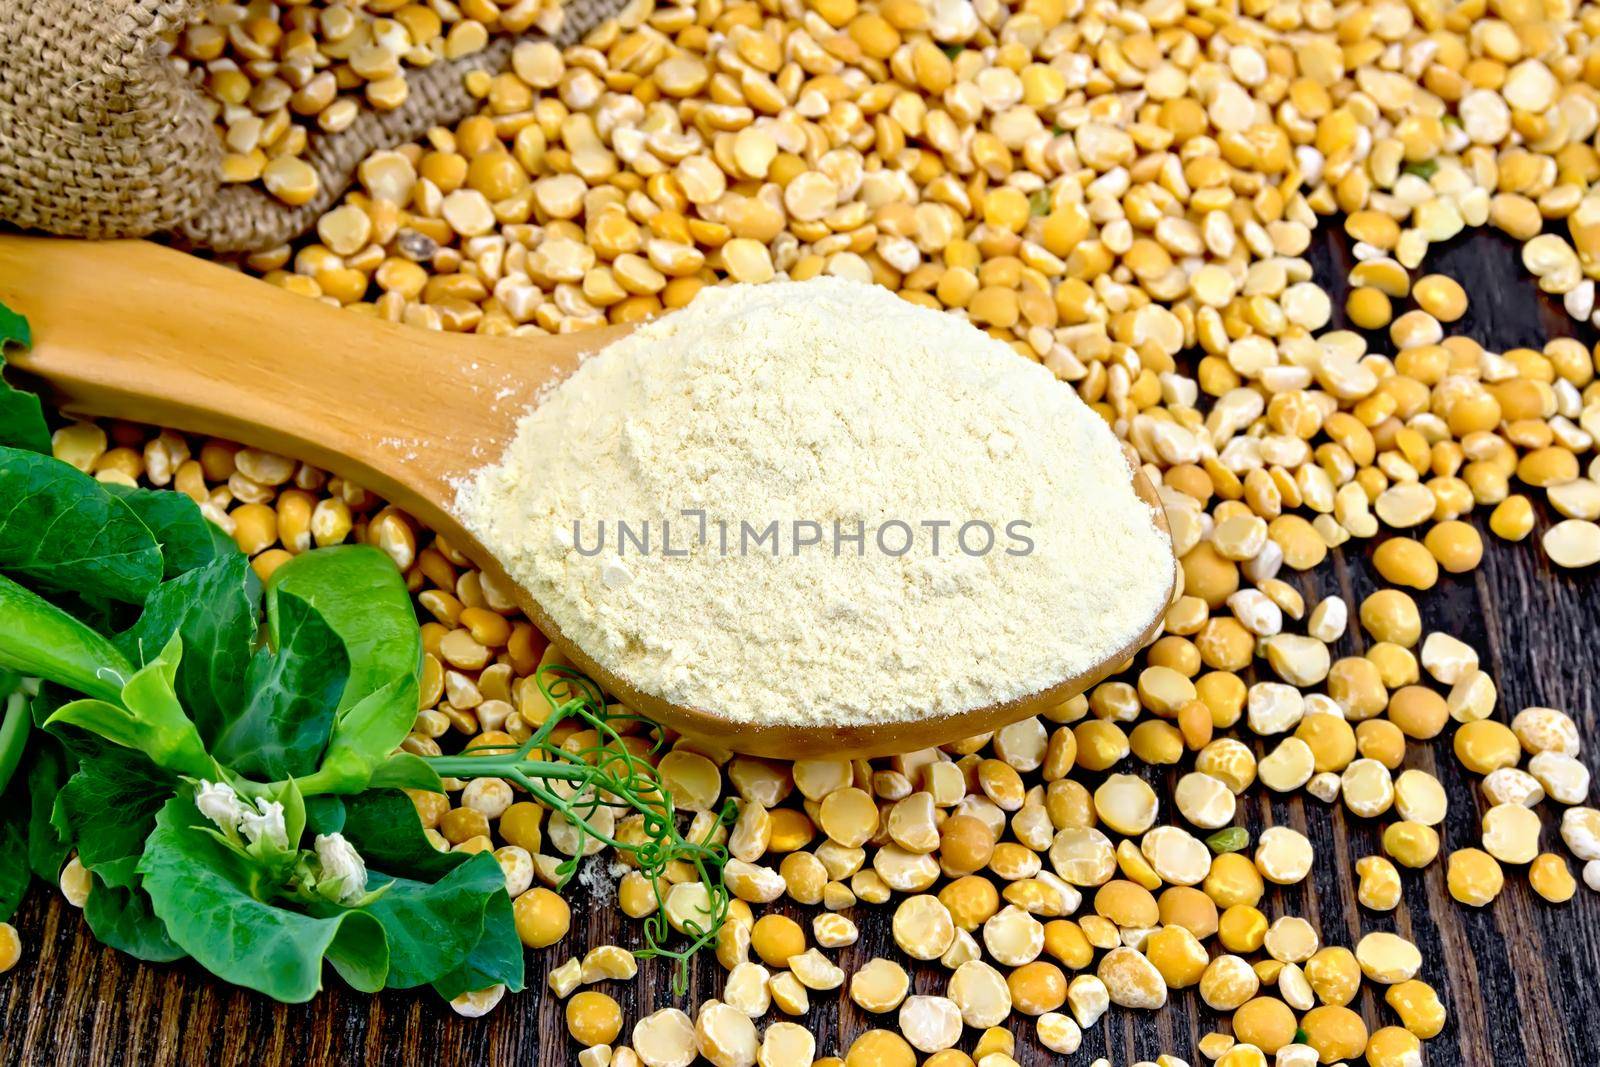 Flour pea in a spoon, fresh pods and split pease on a dark wooden boards background